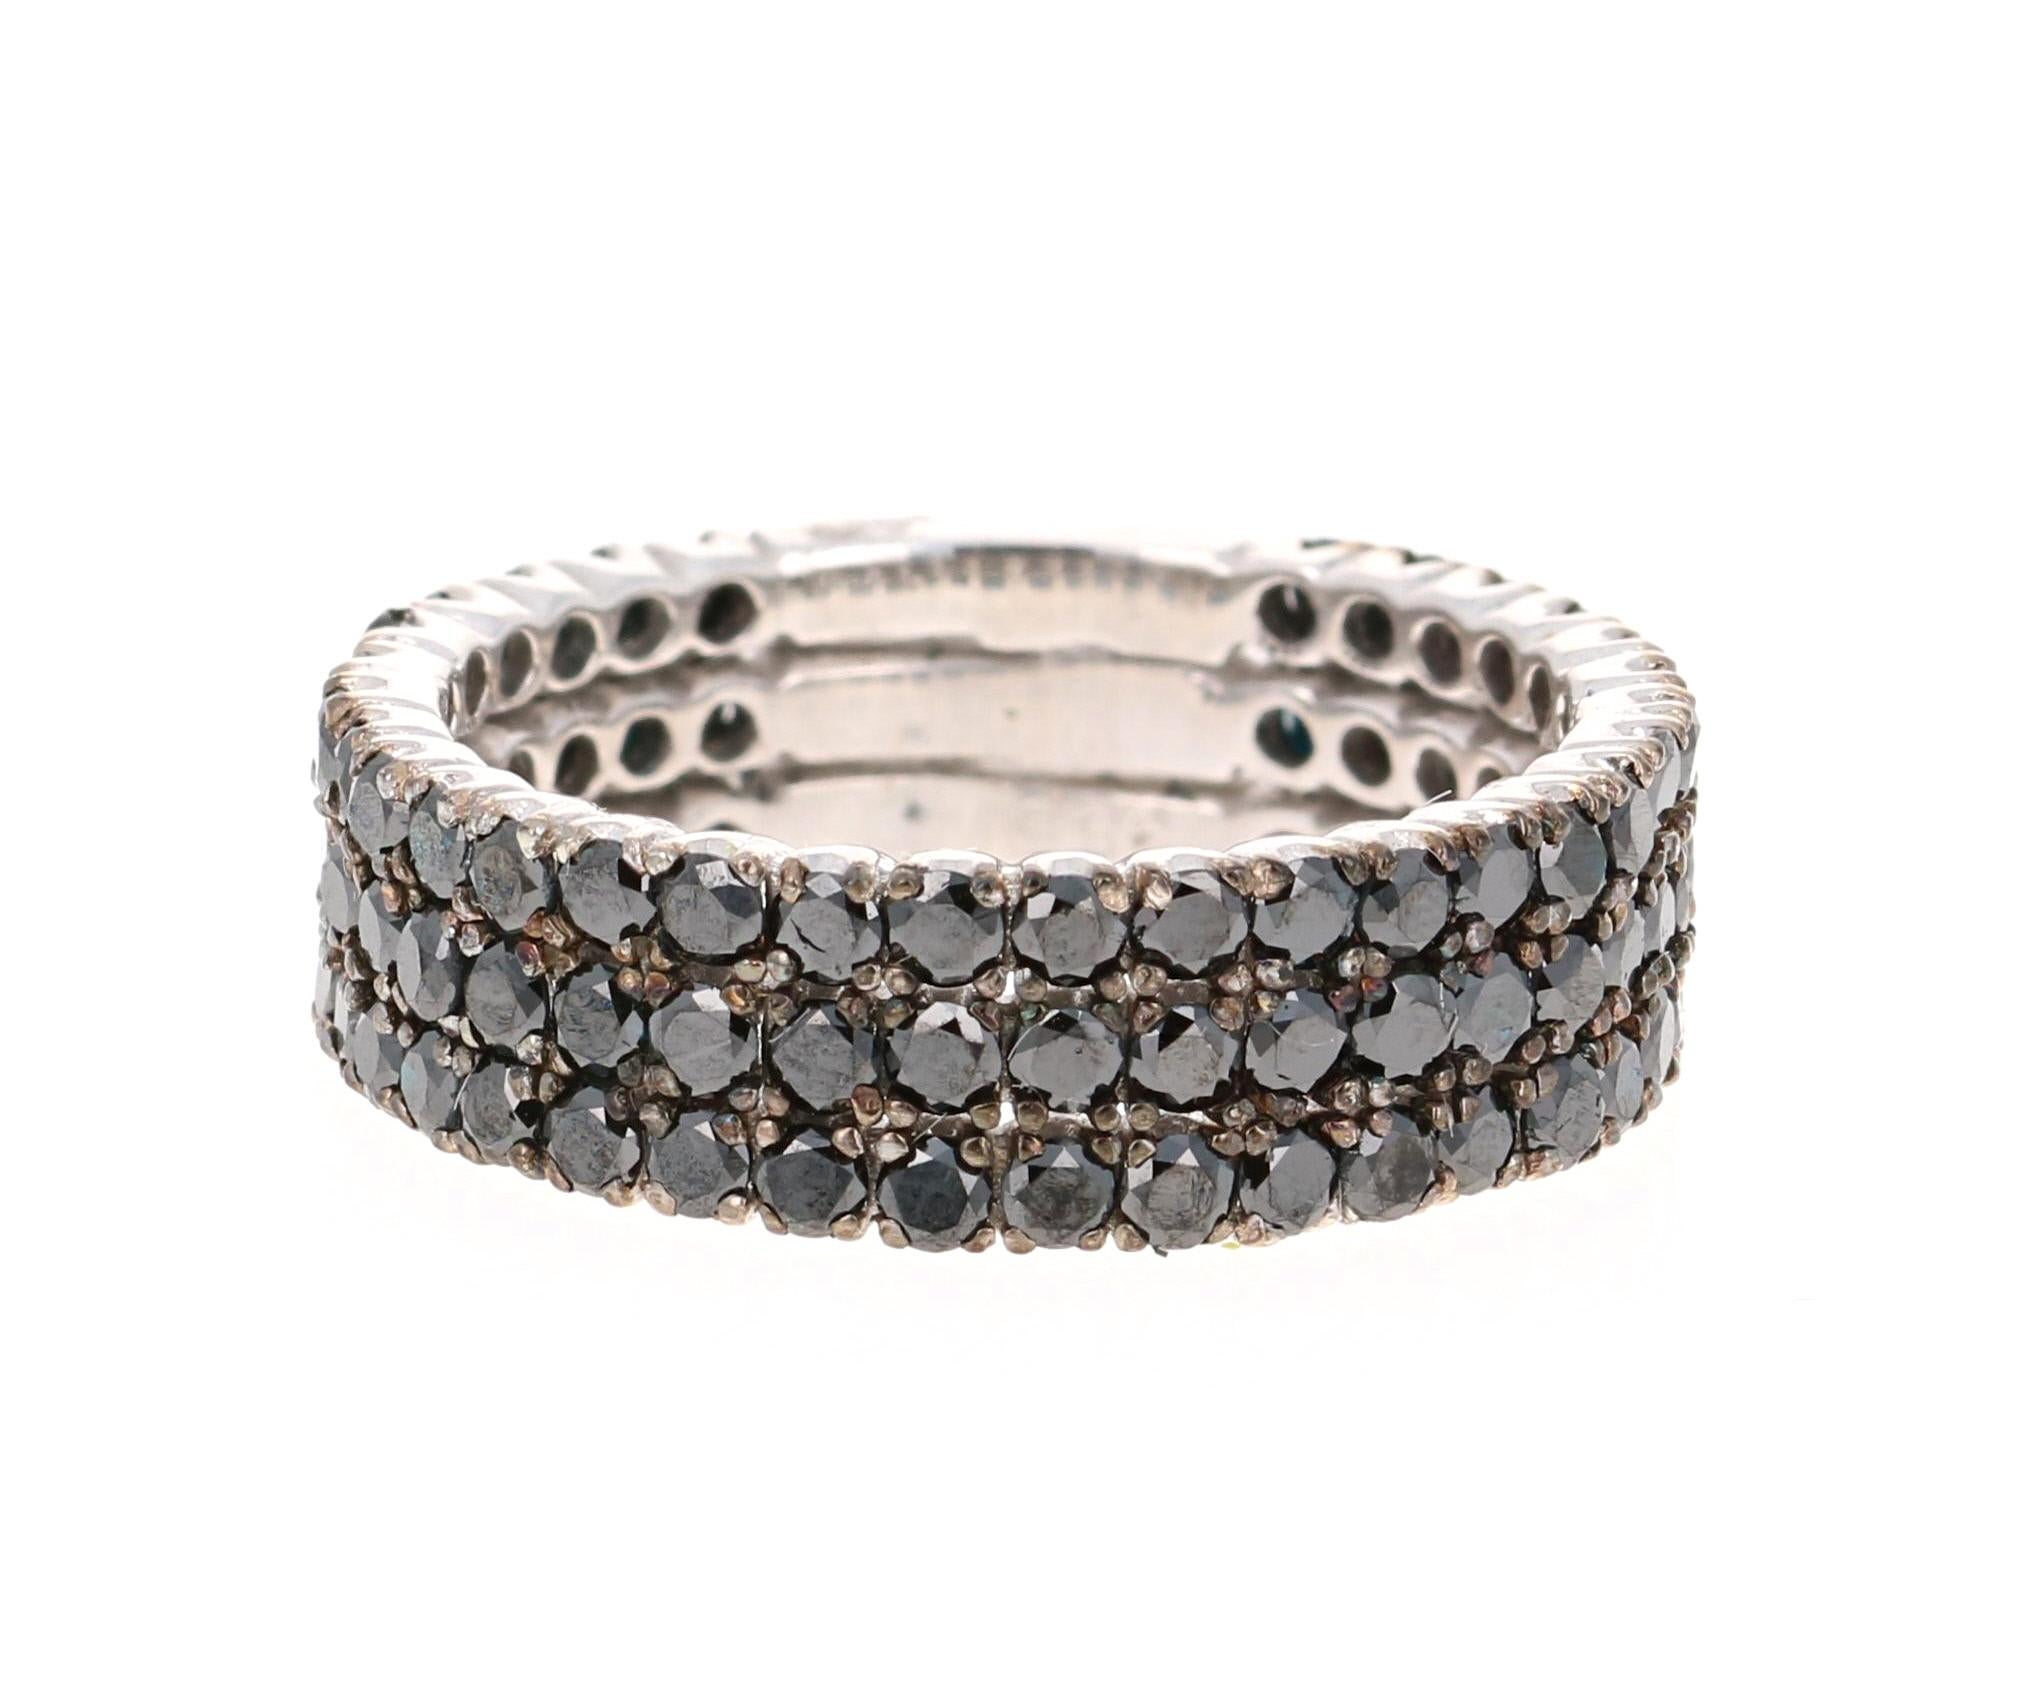 Simple yet Elegant.....This classic design is going to compliment almost anything in your wardrobe!   This band gives the illusion that you are wearing 3 separate bands but is actually just 1 band.  There are a total of 90 Round Cut Black Diamonds